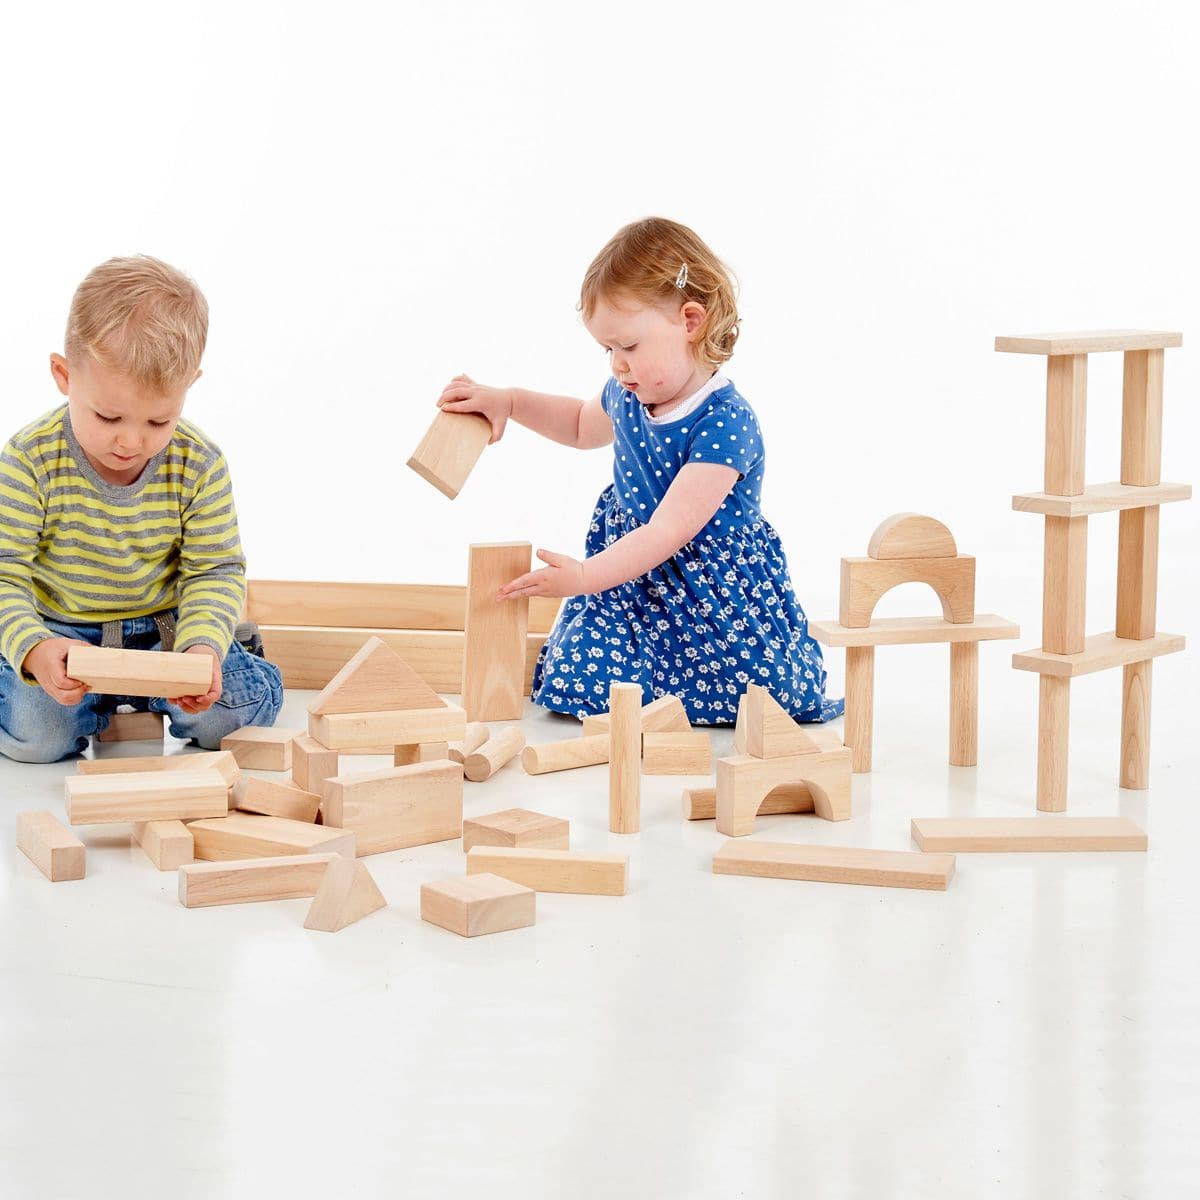 Large Wooden Blocks, Large selection of solid wooden blocks in traditional construction shapes, packed in a wooden tray for convenient storage. These natural Jumbo Wooden Blocks will delight your little one and provide hours of fun and learning opportunities as they create and build. Wooden blocks of all different shapes and sizes ensure that every play session is unique. When play time's over, all of the blocks can be stored away in the sturdy wooden tray.Our Large Wooden Blocks will delight your little on